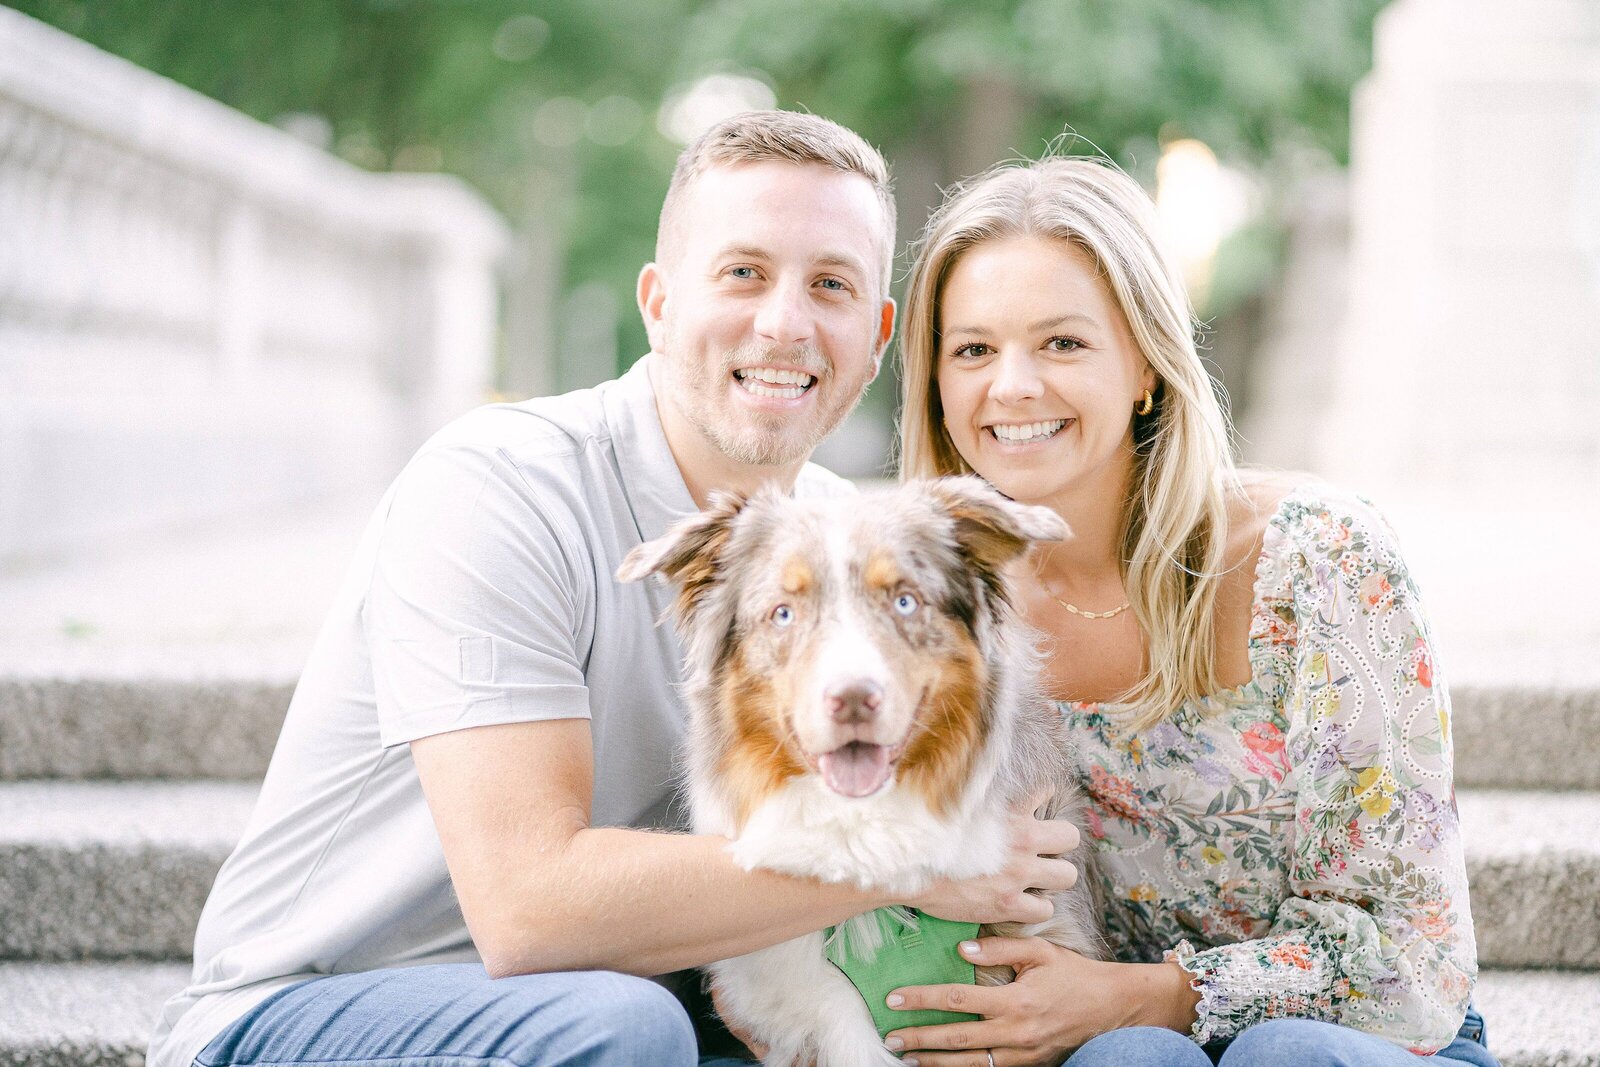 Chicago_Engagement_Photography_Katie_Whitcomb_Elle_Blake_0003